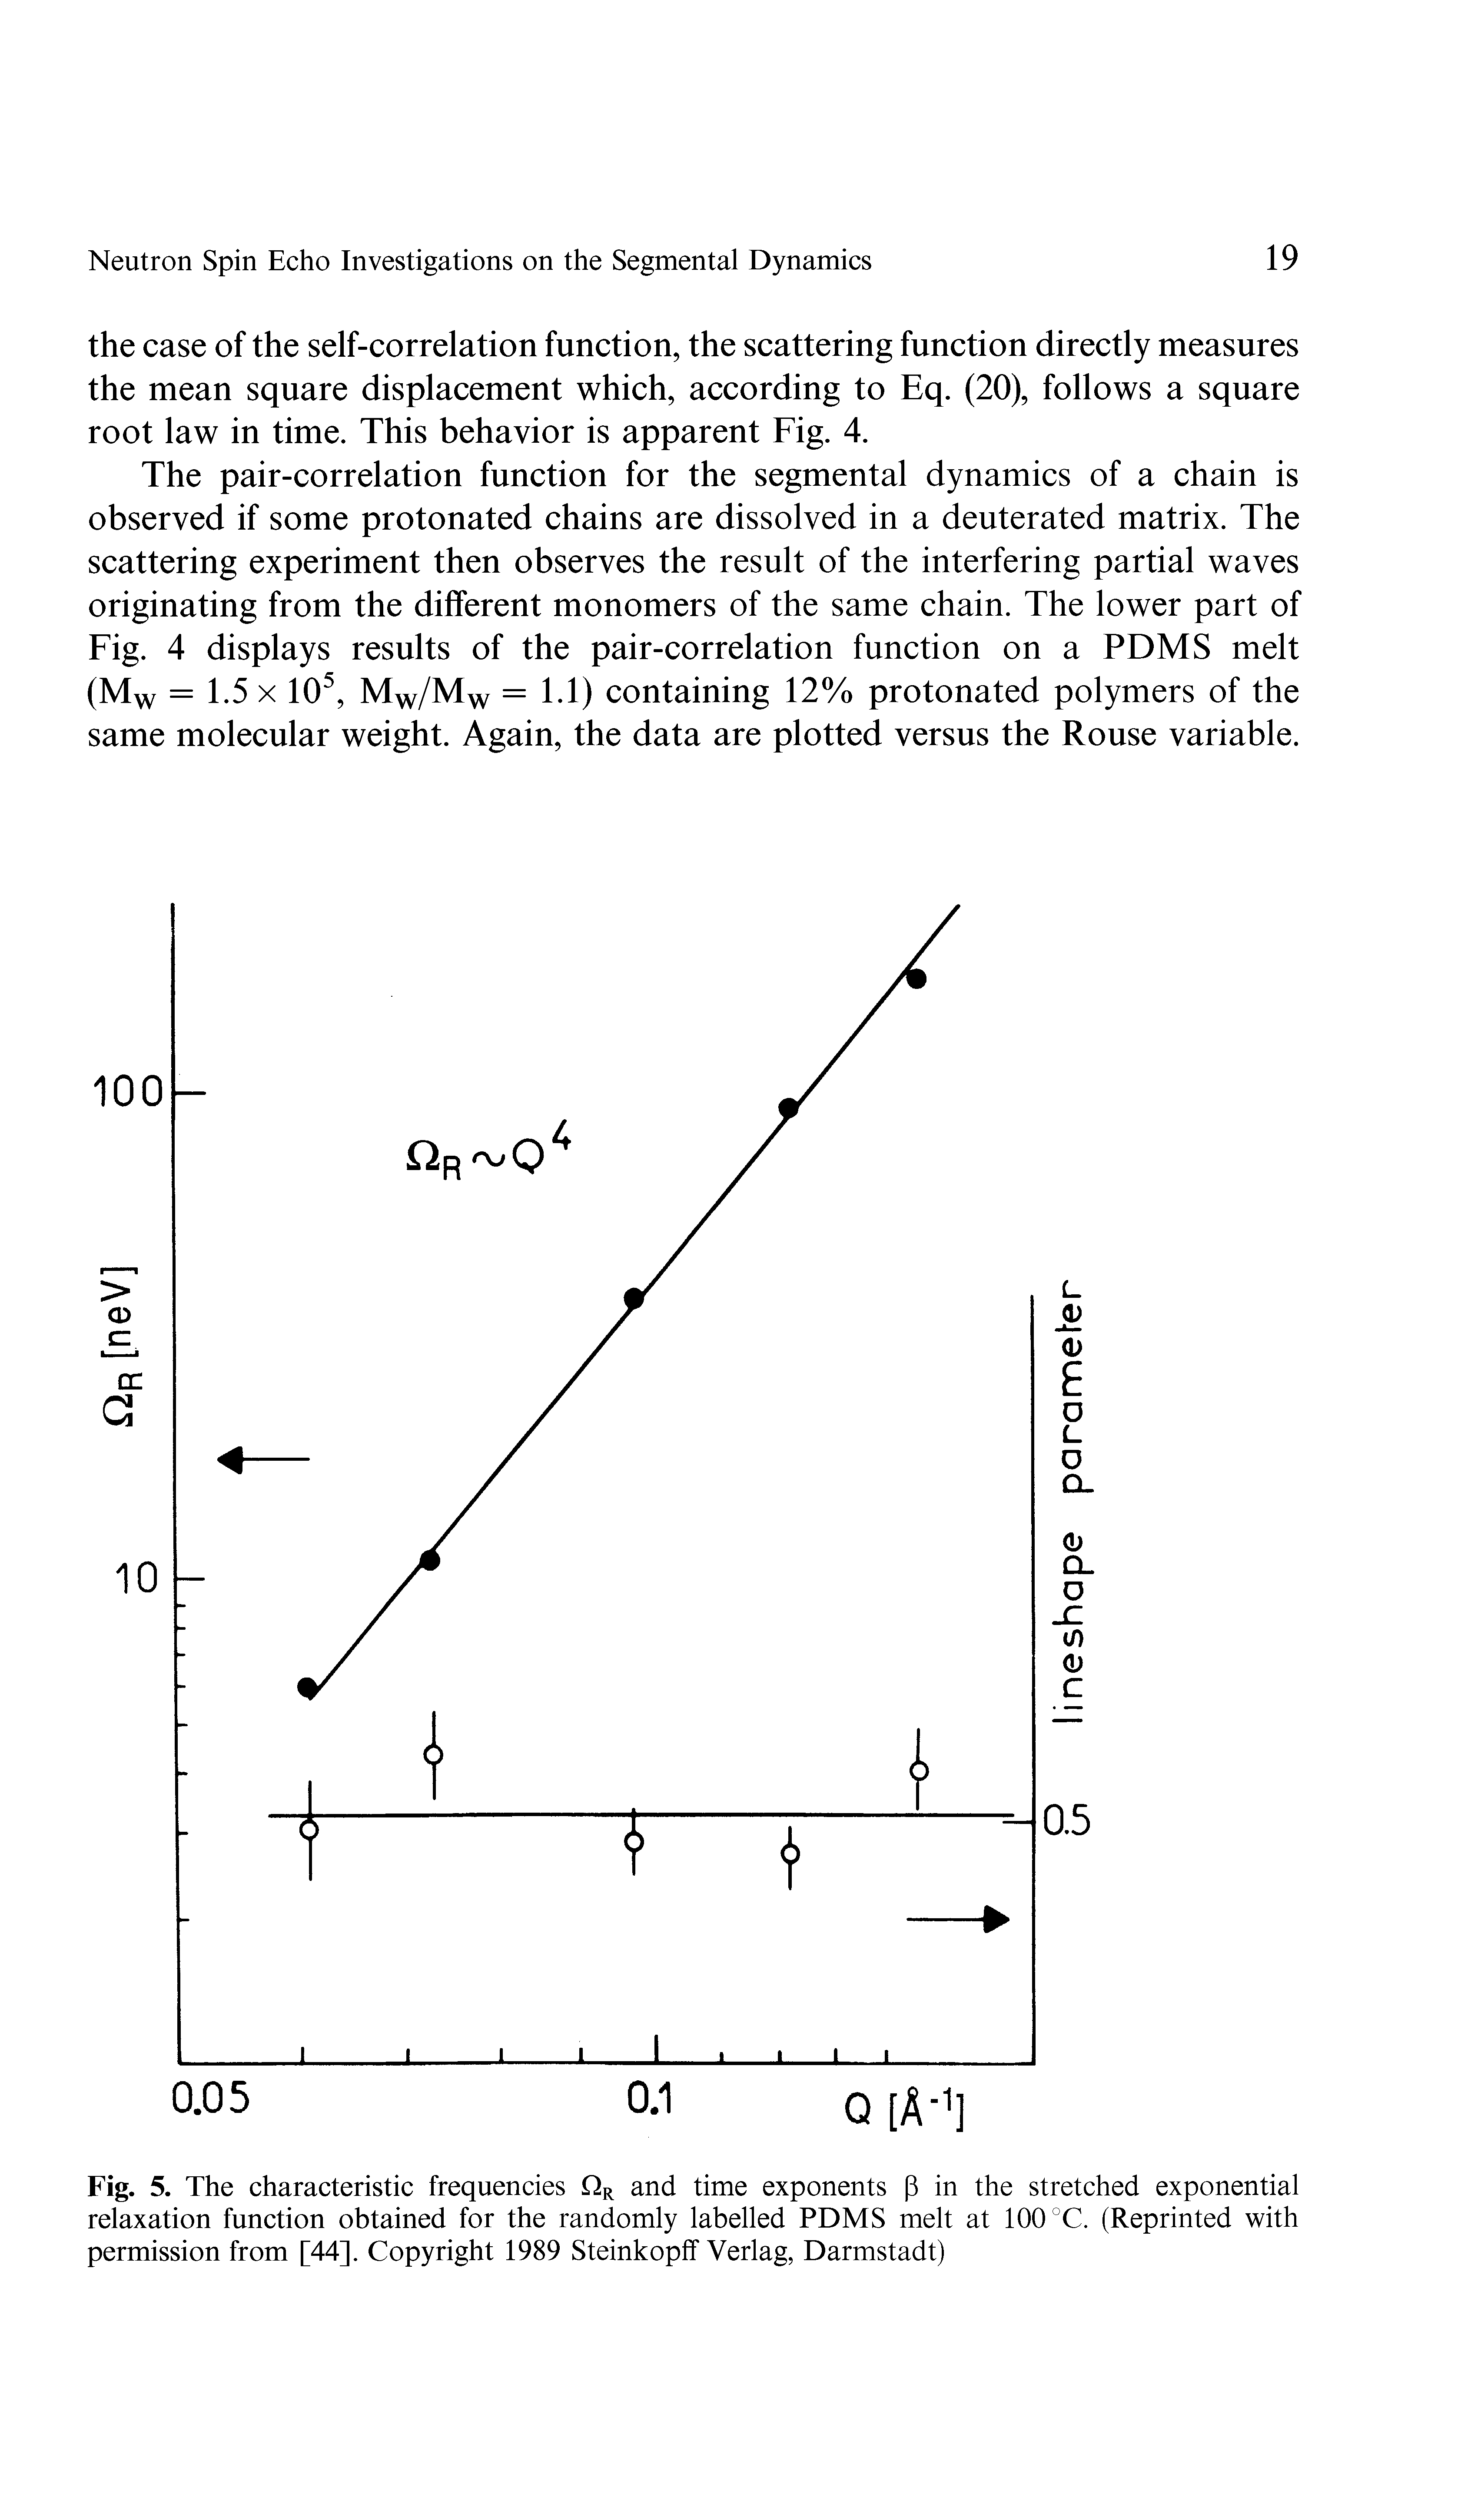 Fig. 5. The characteristic frequencies QR and time exponents (3 in the stretched exponential relaxation function obtained for the randomly labelled PDMS melt at 100 °C. (Reprinted with permission from [44]. Copyright 1989 Steinkopff Verlag, Darmstadt)...